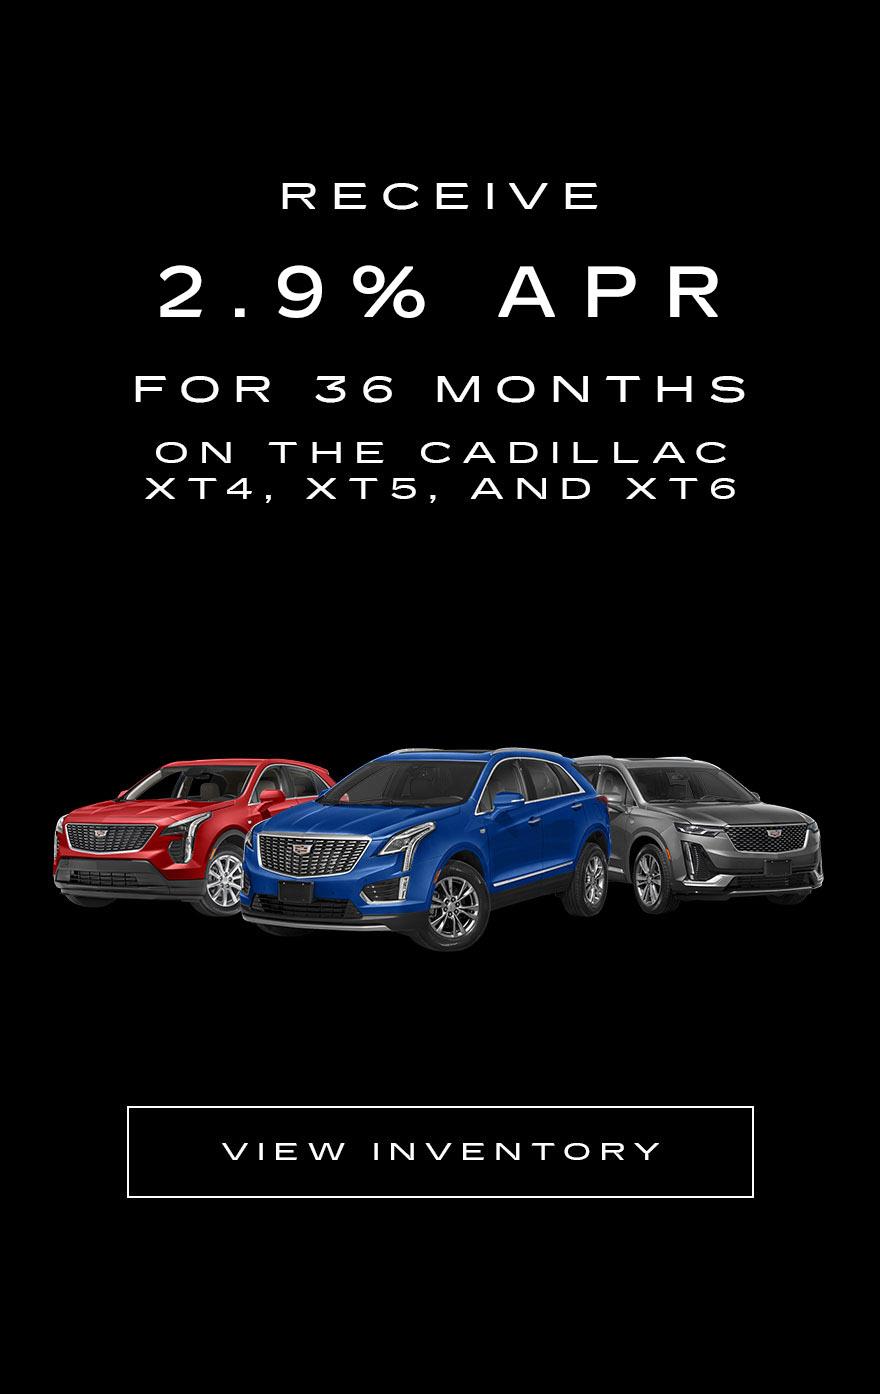 Receive 1.9% APR for 36 Months on the Cadillac XT4, XT5, and XT6